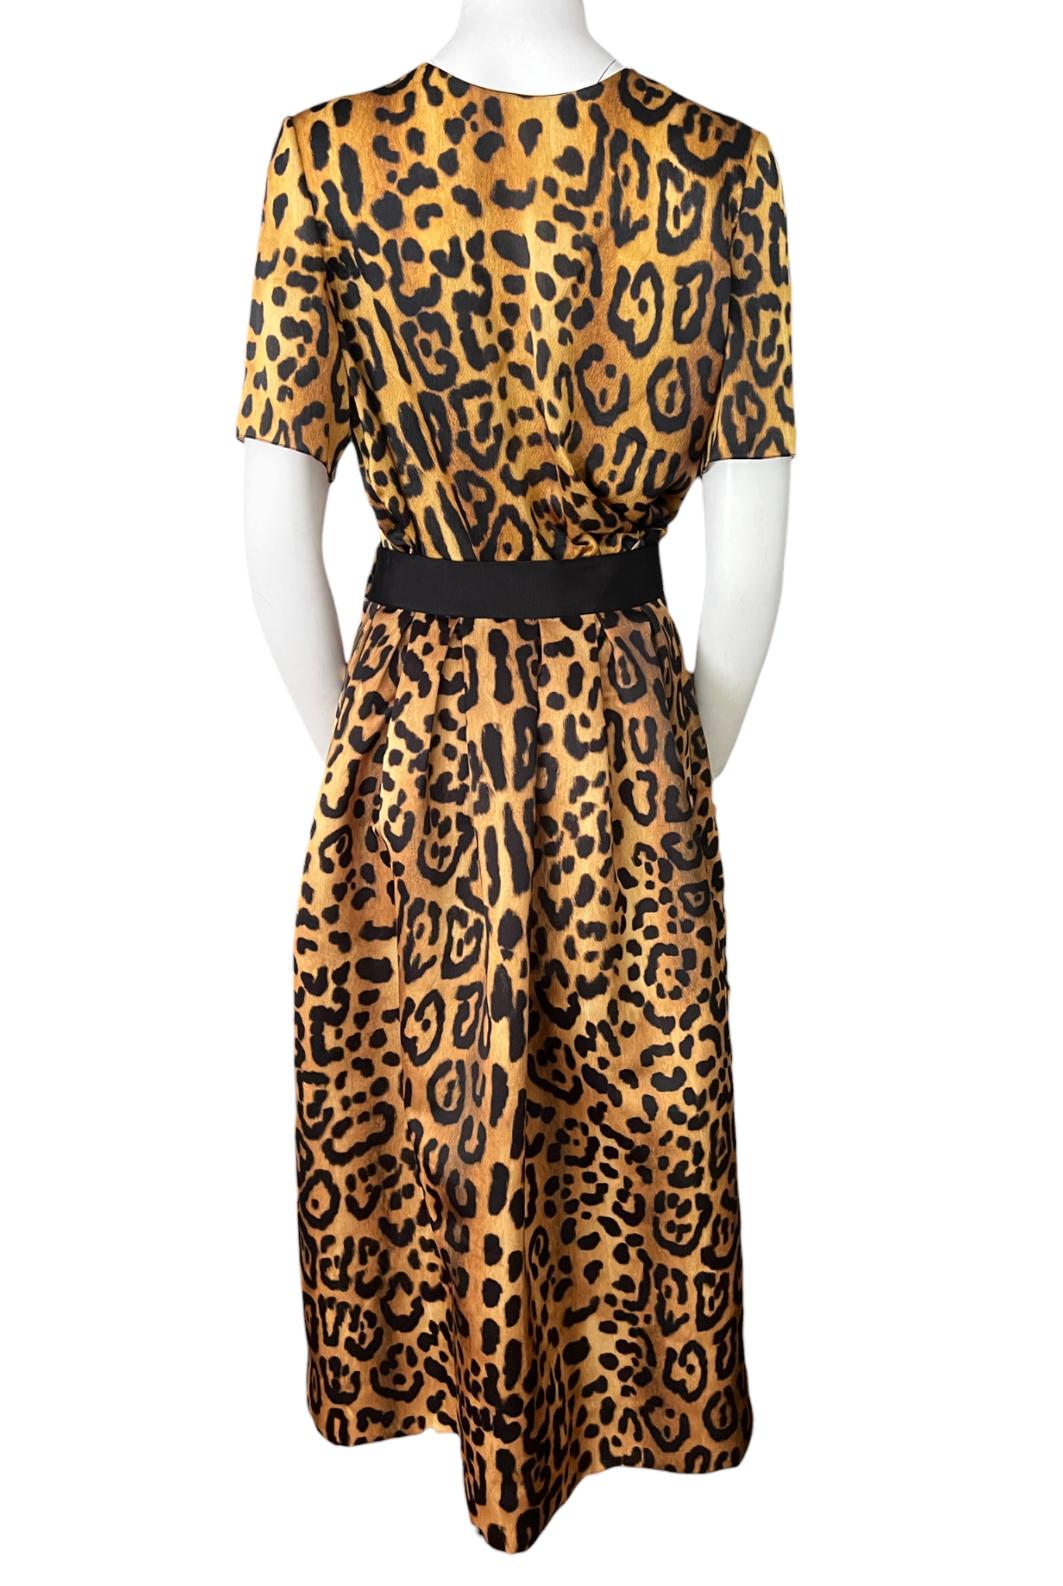 Adam Lippes Silk Leopard Top and Skirt Set In Excellent Condition For Sale In Beverly Hills, CA